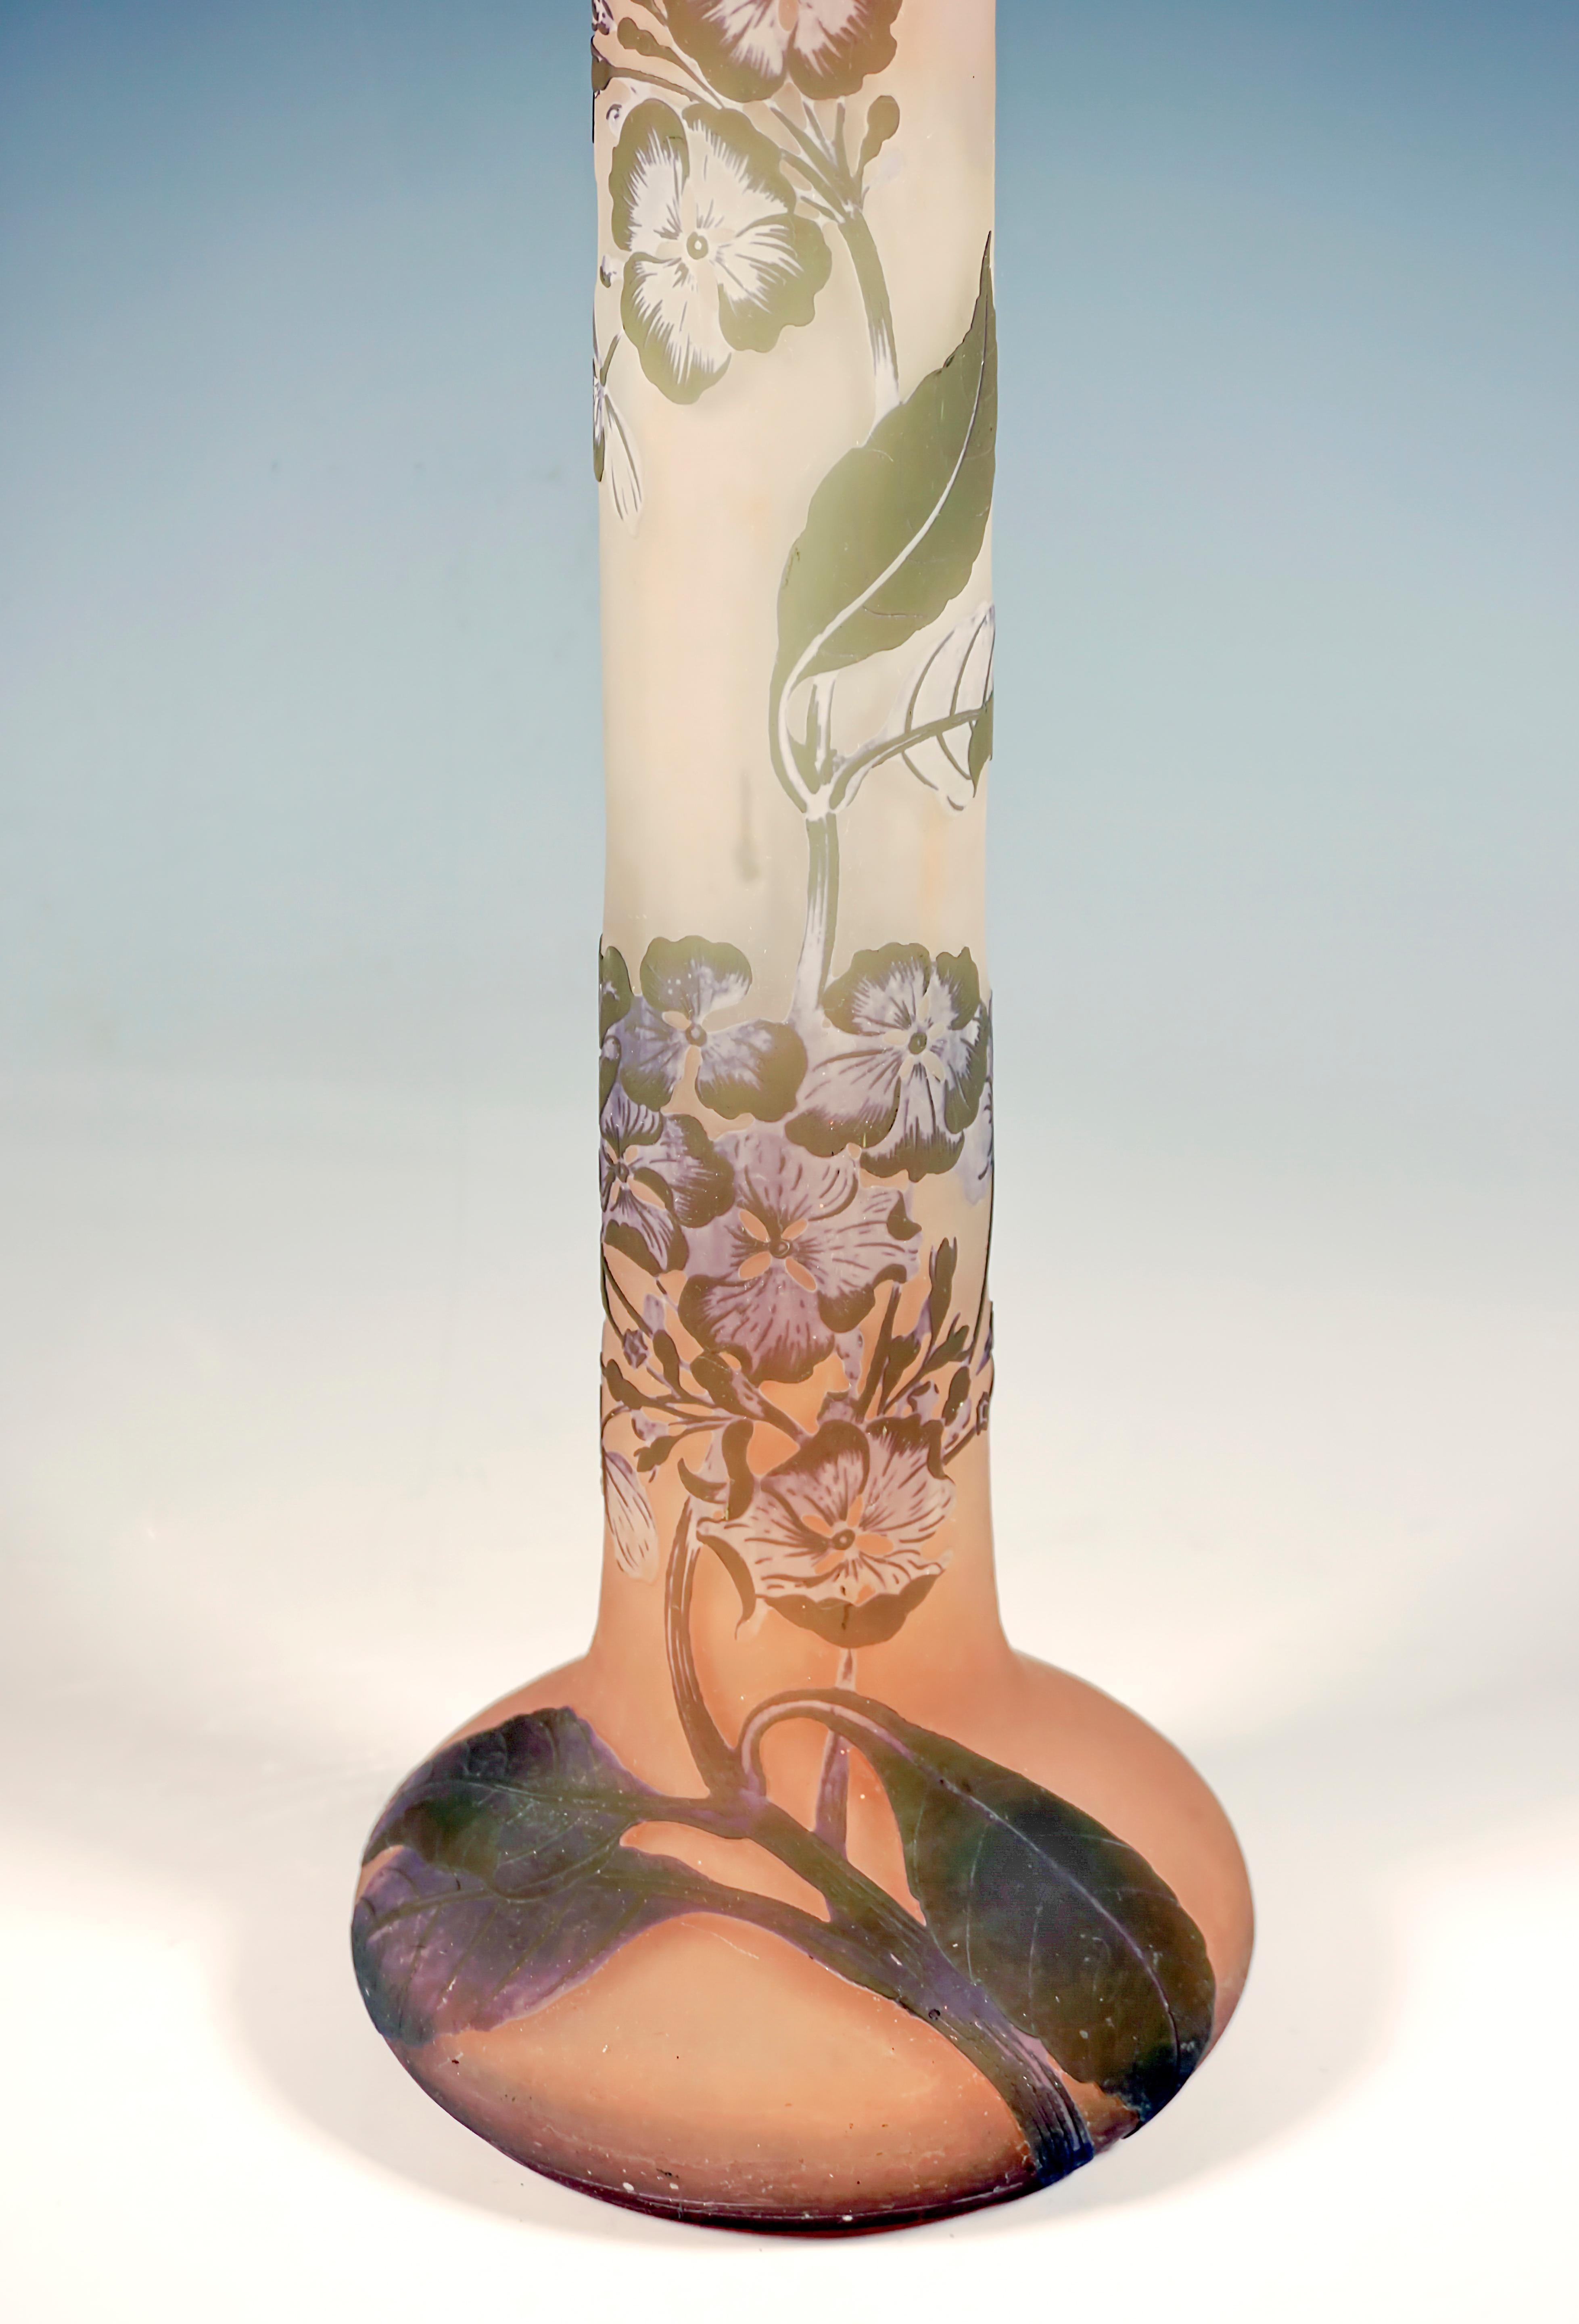 Large Slender Émile Gallé Art Nouveau Vase with Hydrangea Decor, France, c 1906 In Good Condition For Sale In Vienna, AT